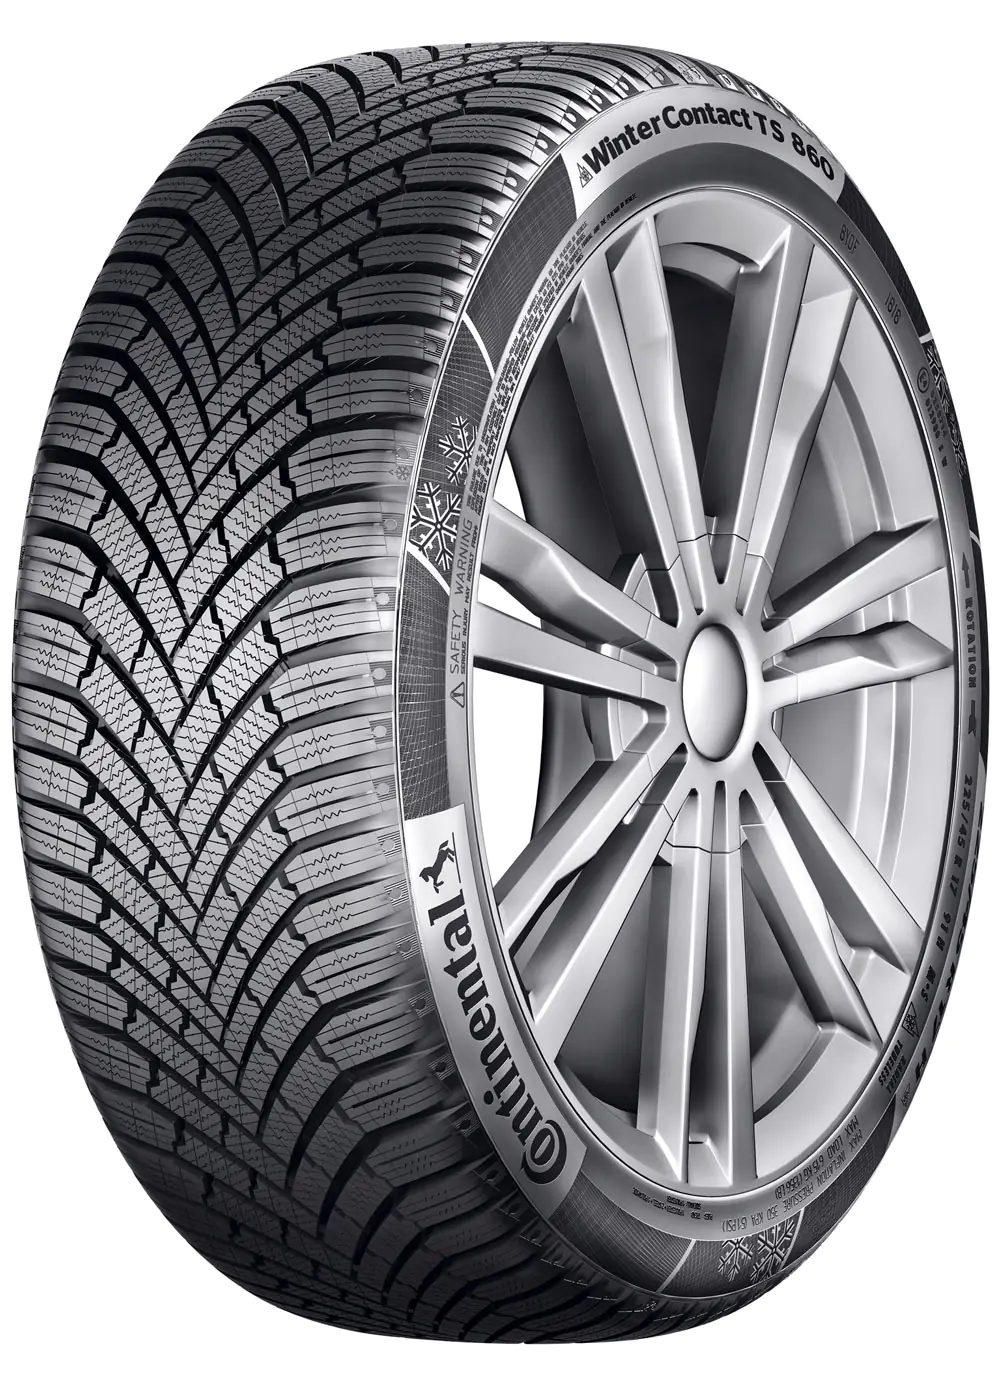 Gomme Autovettura Continental 325/35 R22 114W WINTERCONTACT TS 860 S FR XL M+S Invernale